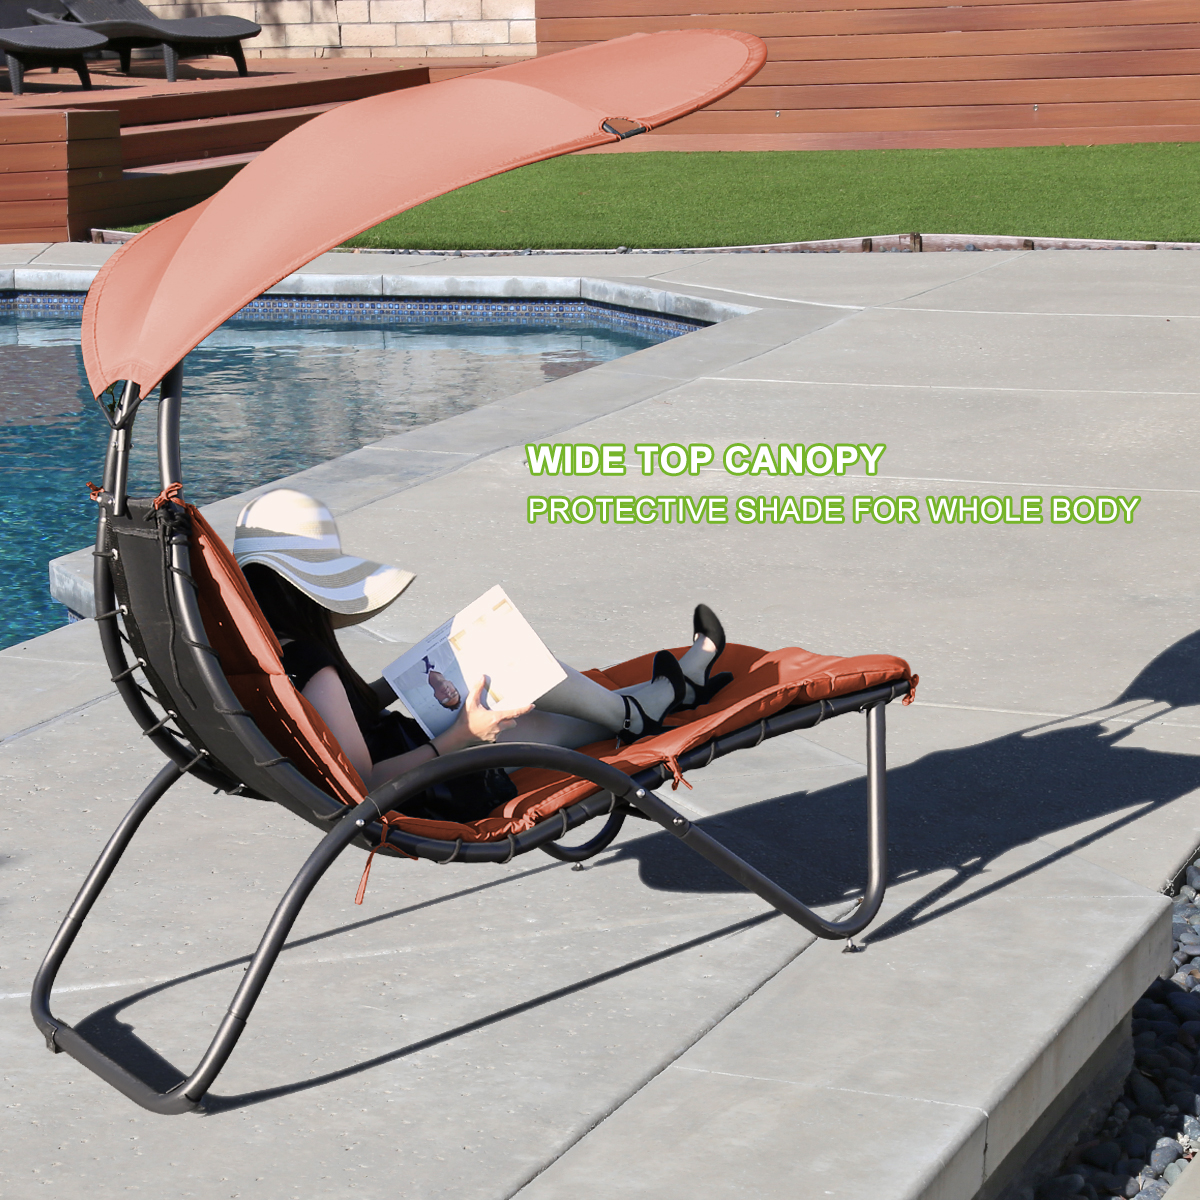 Hanging Chaise Lounger Chair Patio Porch Arc Swing Hammock Chair Canopy Outdoor [Orange] - image 5 of 8